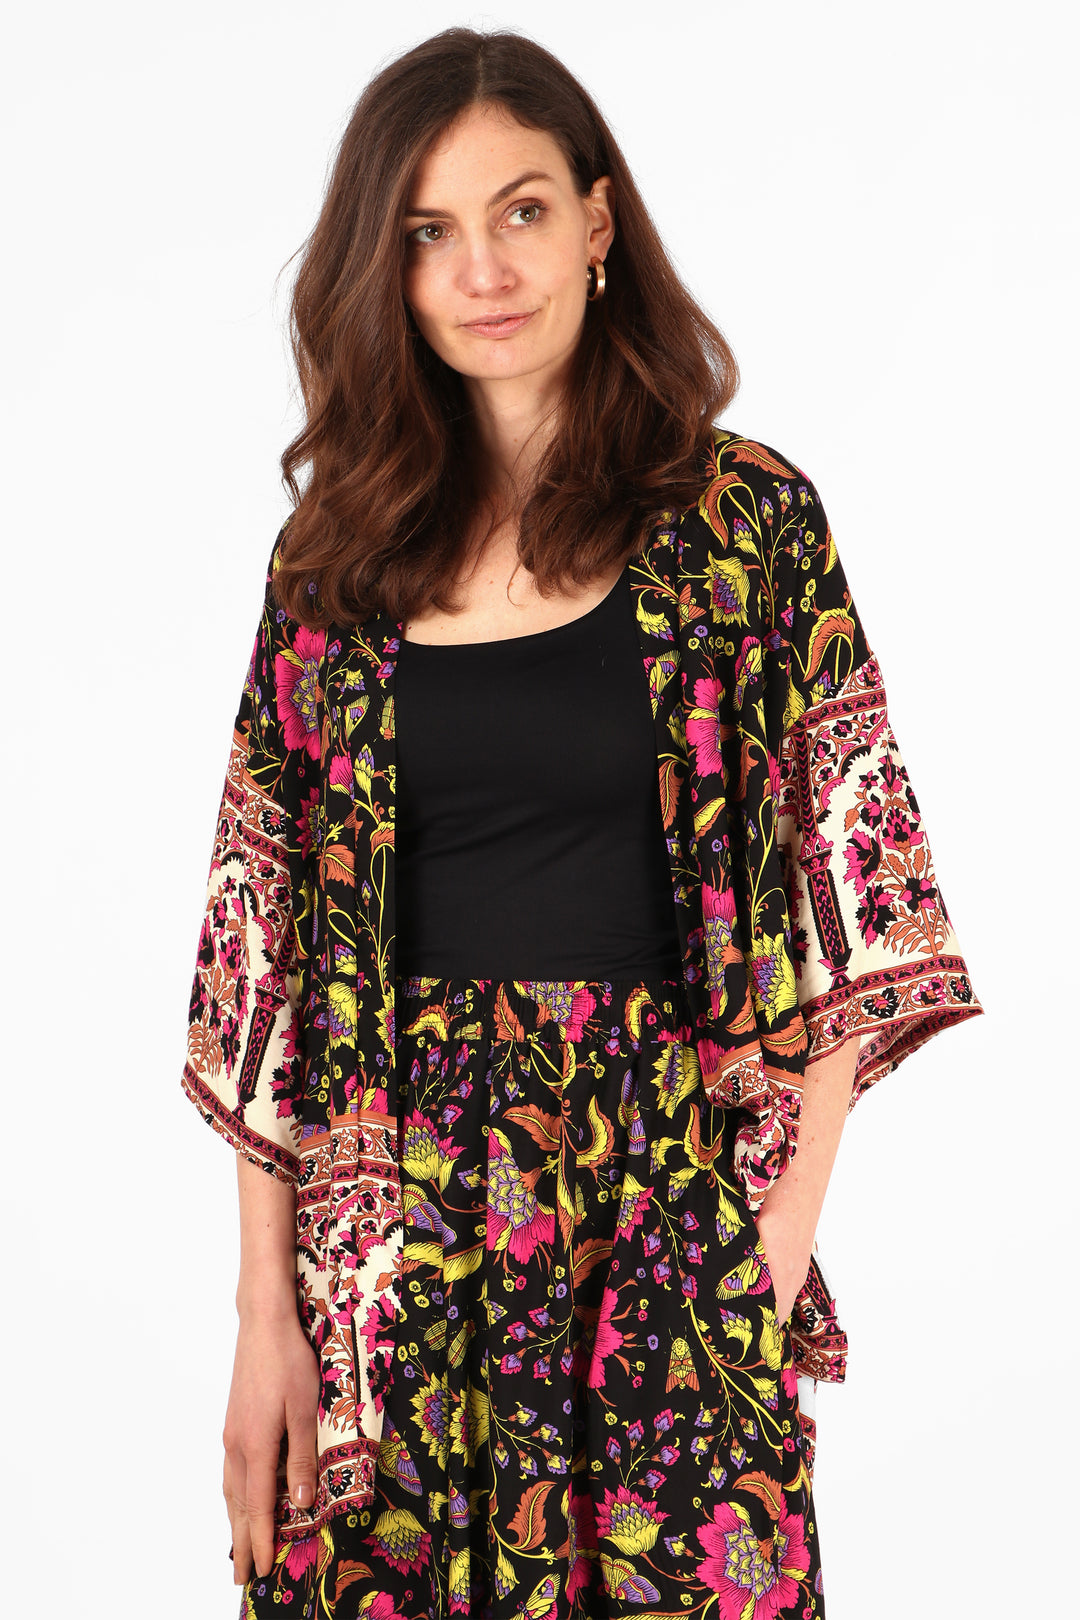 model wearing a black, pink and yellow floral and butterfly pattern short kimono with 3/4 sleeves